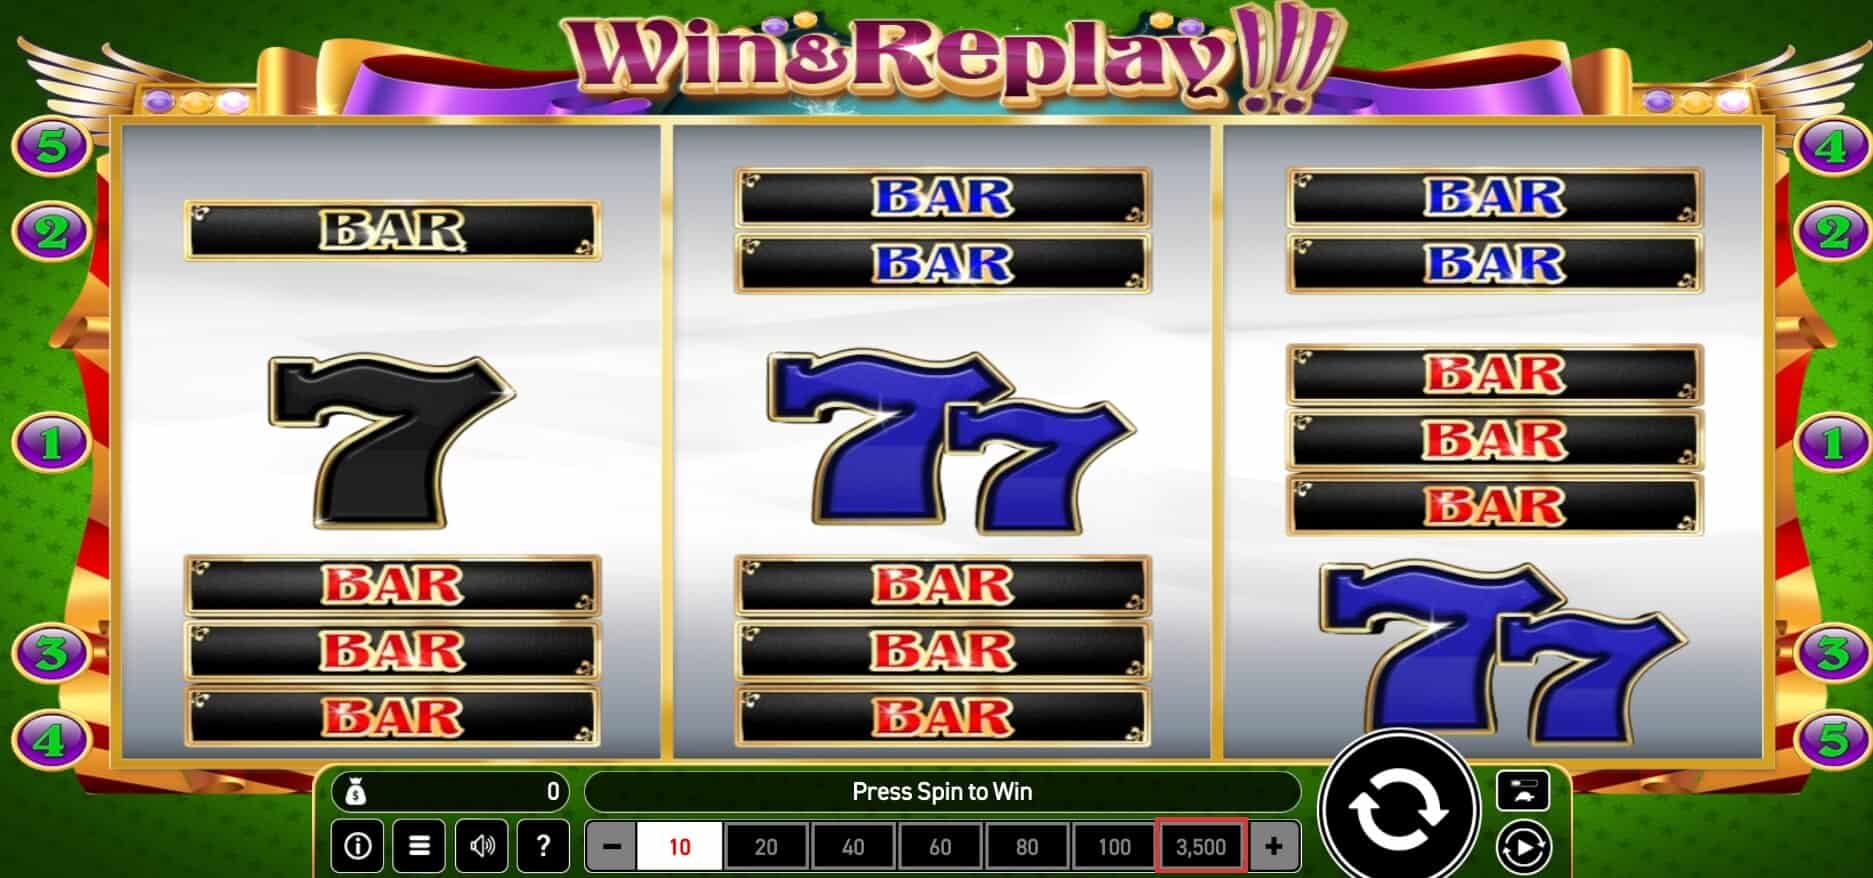 Win And Replay AMBBET เครดิตฟรี สมัคร AMBBET ที่นี่ AMBBET เครดิตฟรี